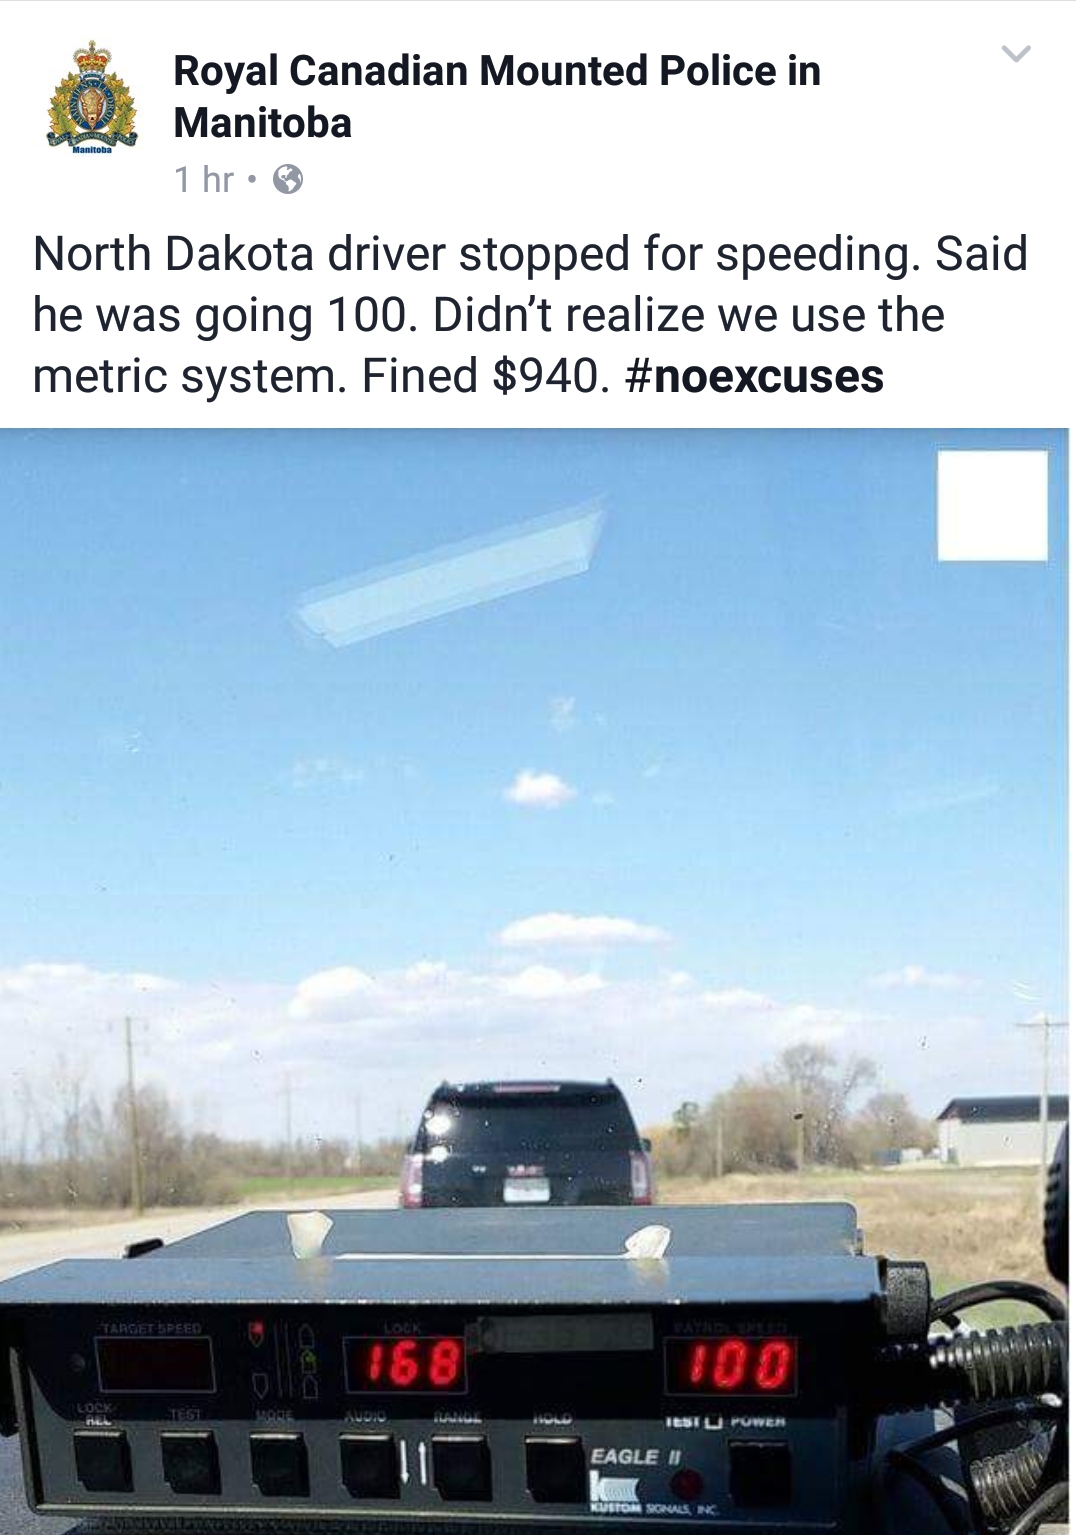 memes - royal canadian mounted police - Royal Canadian Mounted Police in Manitoba 1 hr. North Dakota driver stopped for speeding. Said he was going 100. Didn't realize we use the metric system. Fined $940. 168 100